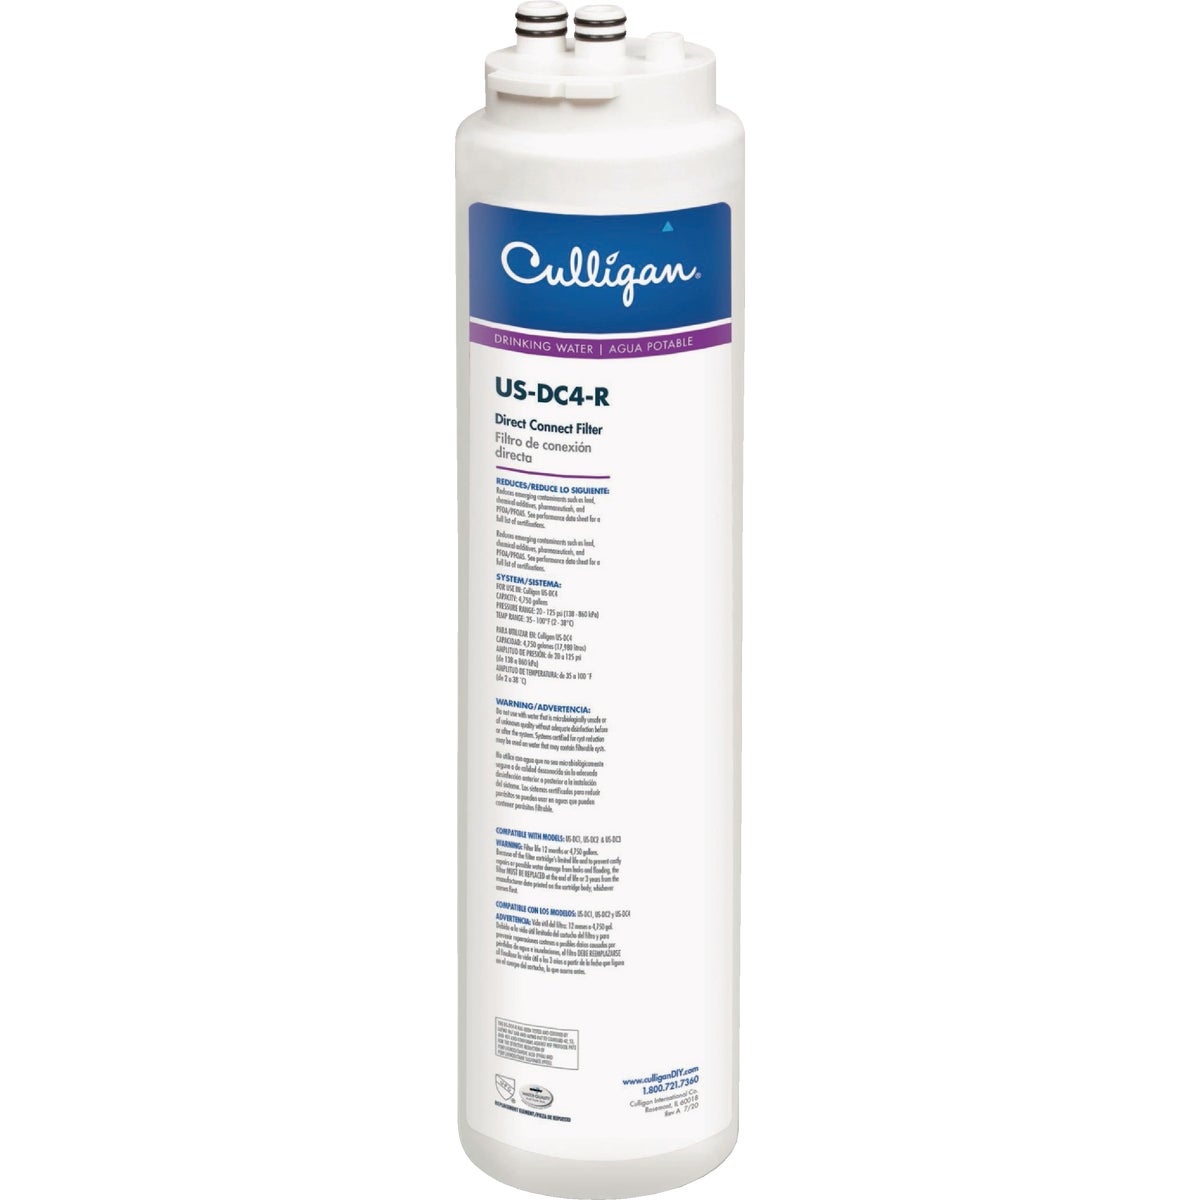 Culligan US-DC4-R Direct Connect Under Sink Drinking Water Filter Replacement Cartridge, Premium Filtration